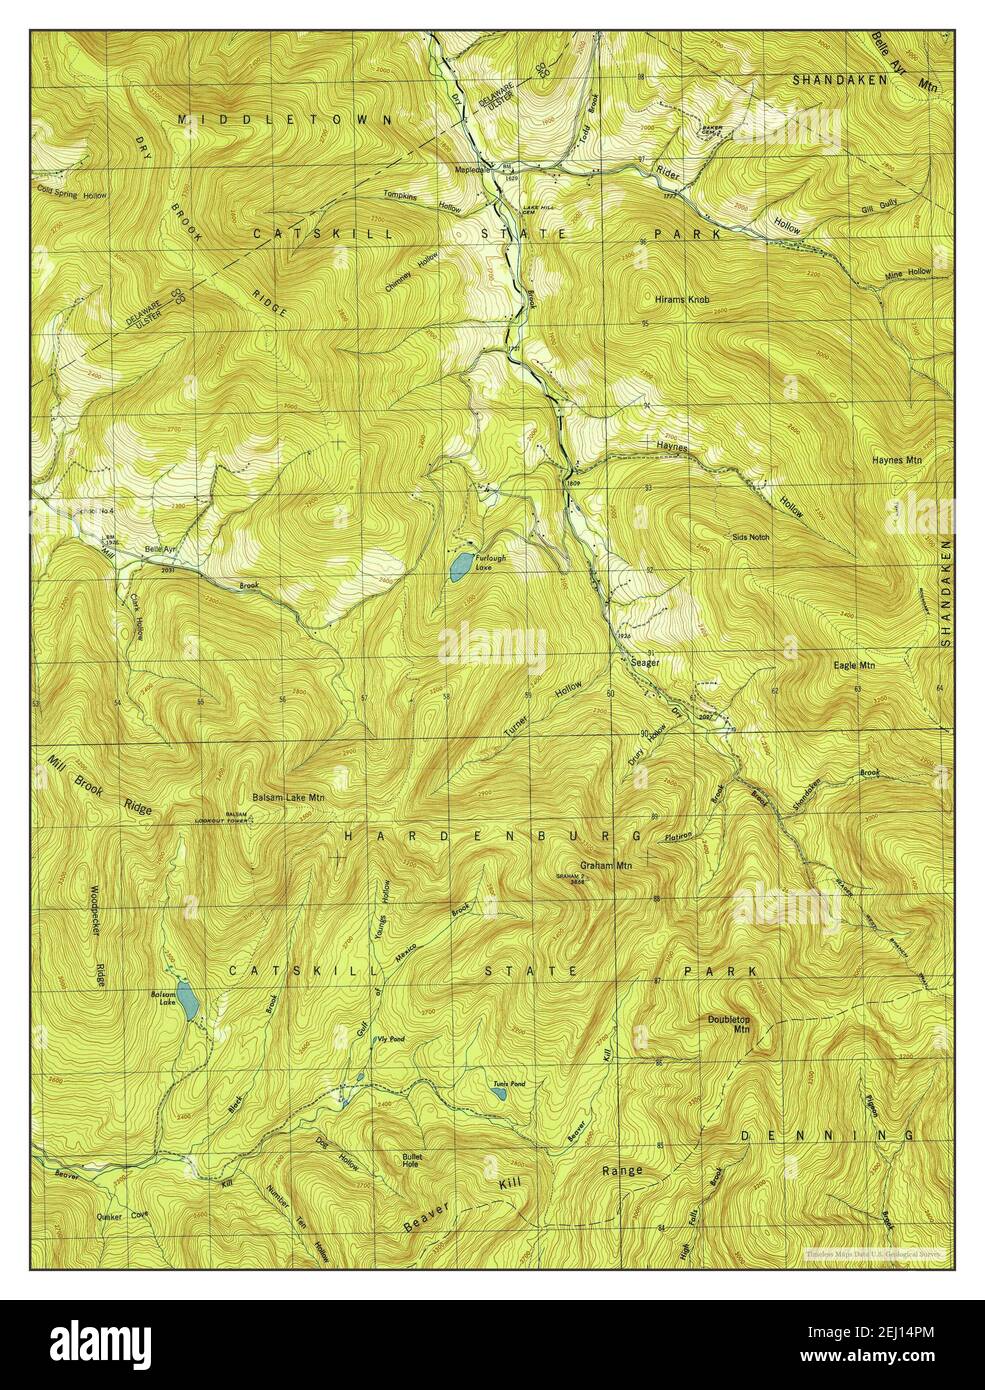 Seager, New York, map 1945, 1:24000, United States of America by Timeless Maps, data U.S. Geological Survey Stock Photo